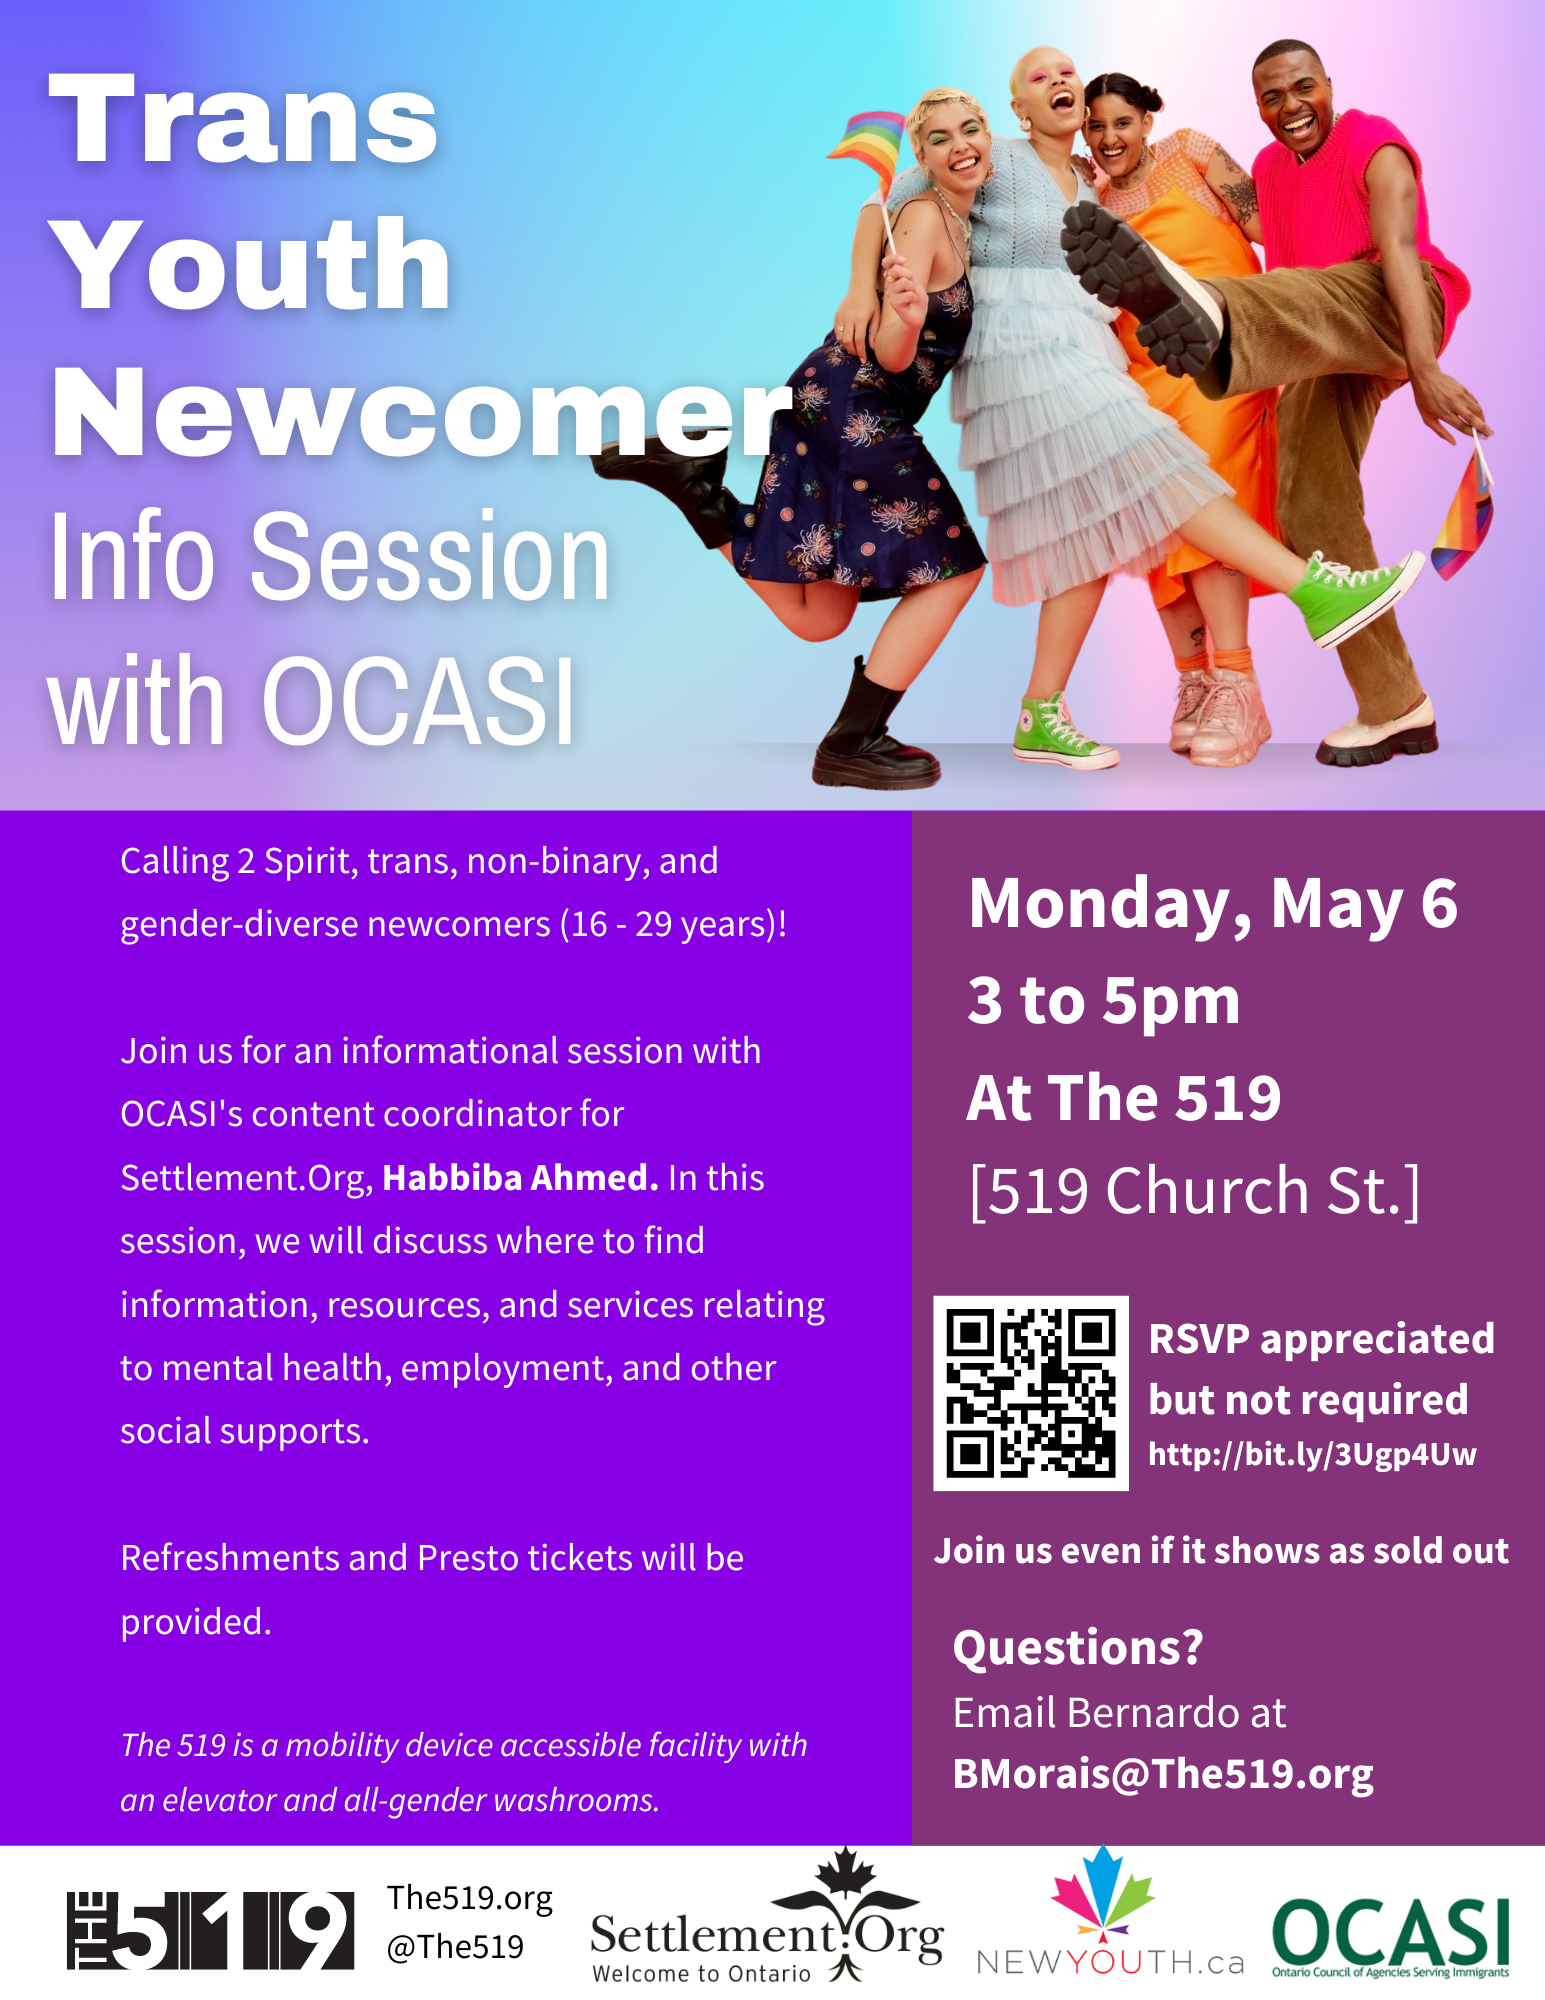 Trans Youth Newcomer Info Session with OCASI